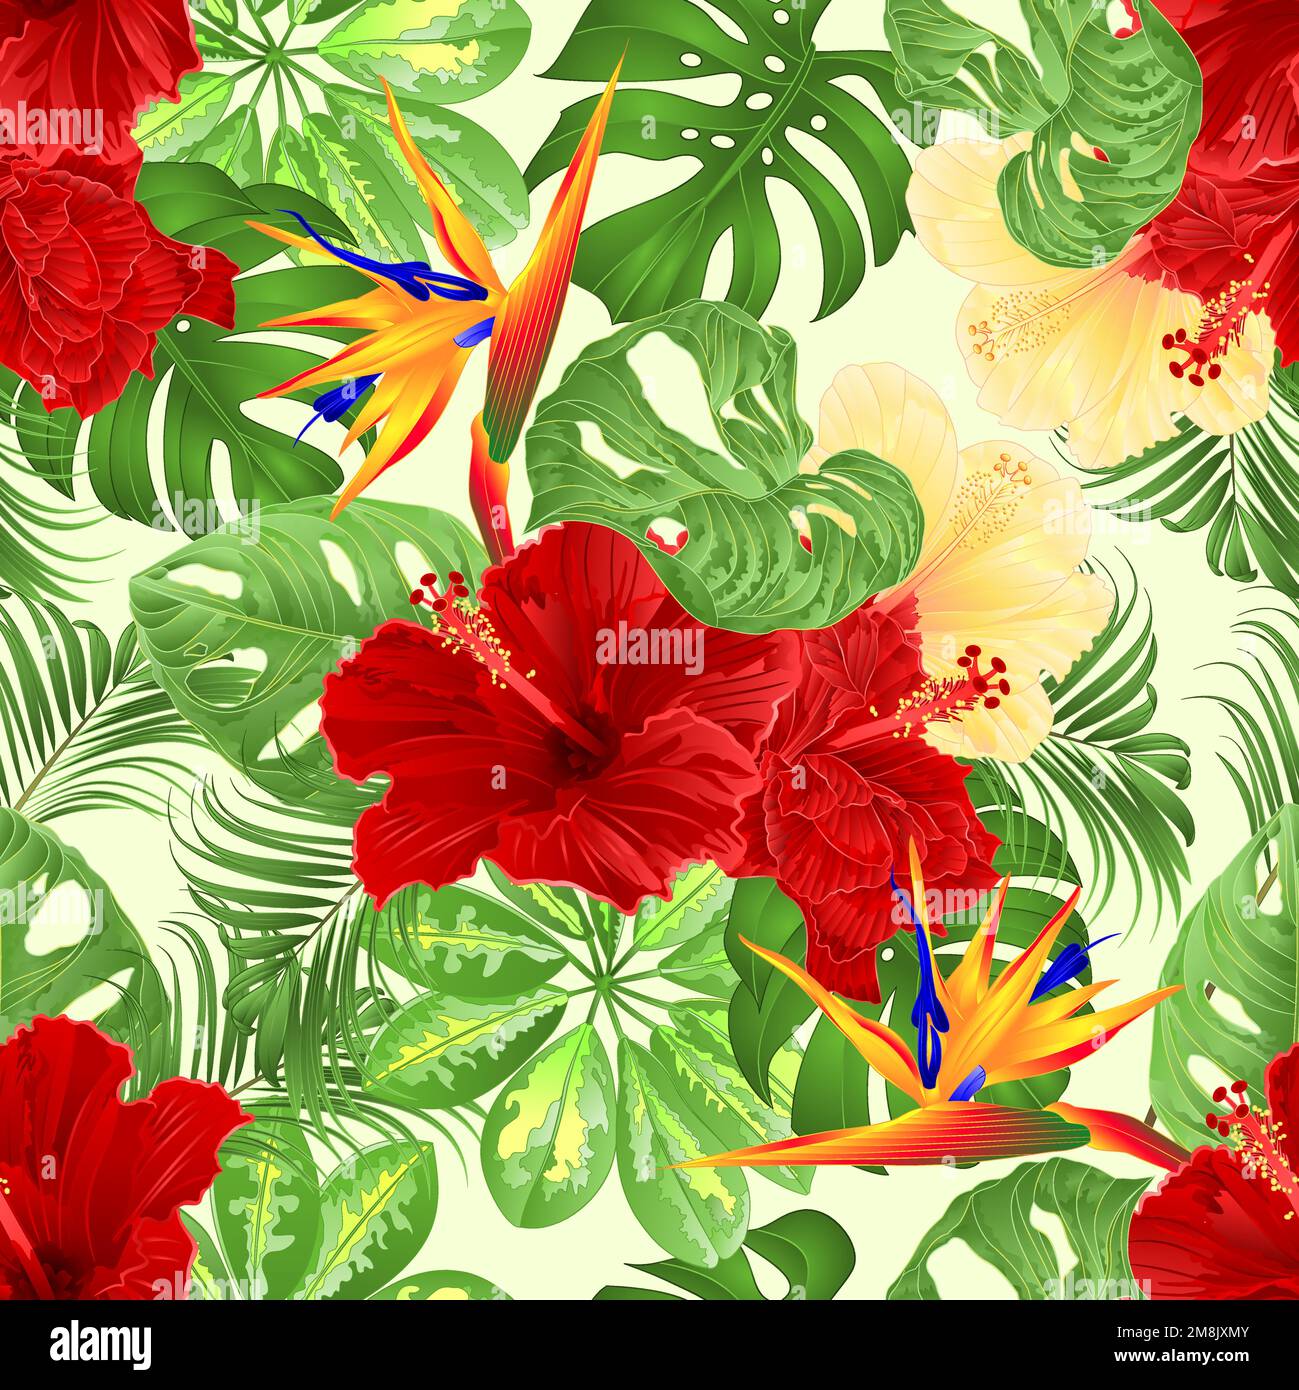 Seamless texture bouquet with tropical flowers  floral arrangement with  Strelitzia and red and yellow hibiscus   palm,philodendron and Schefflera and Stock Vector